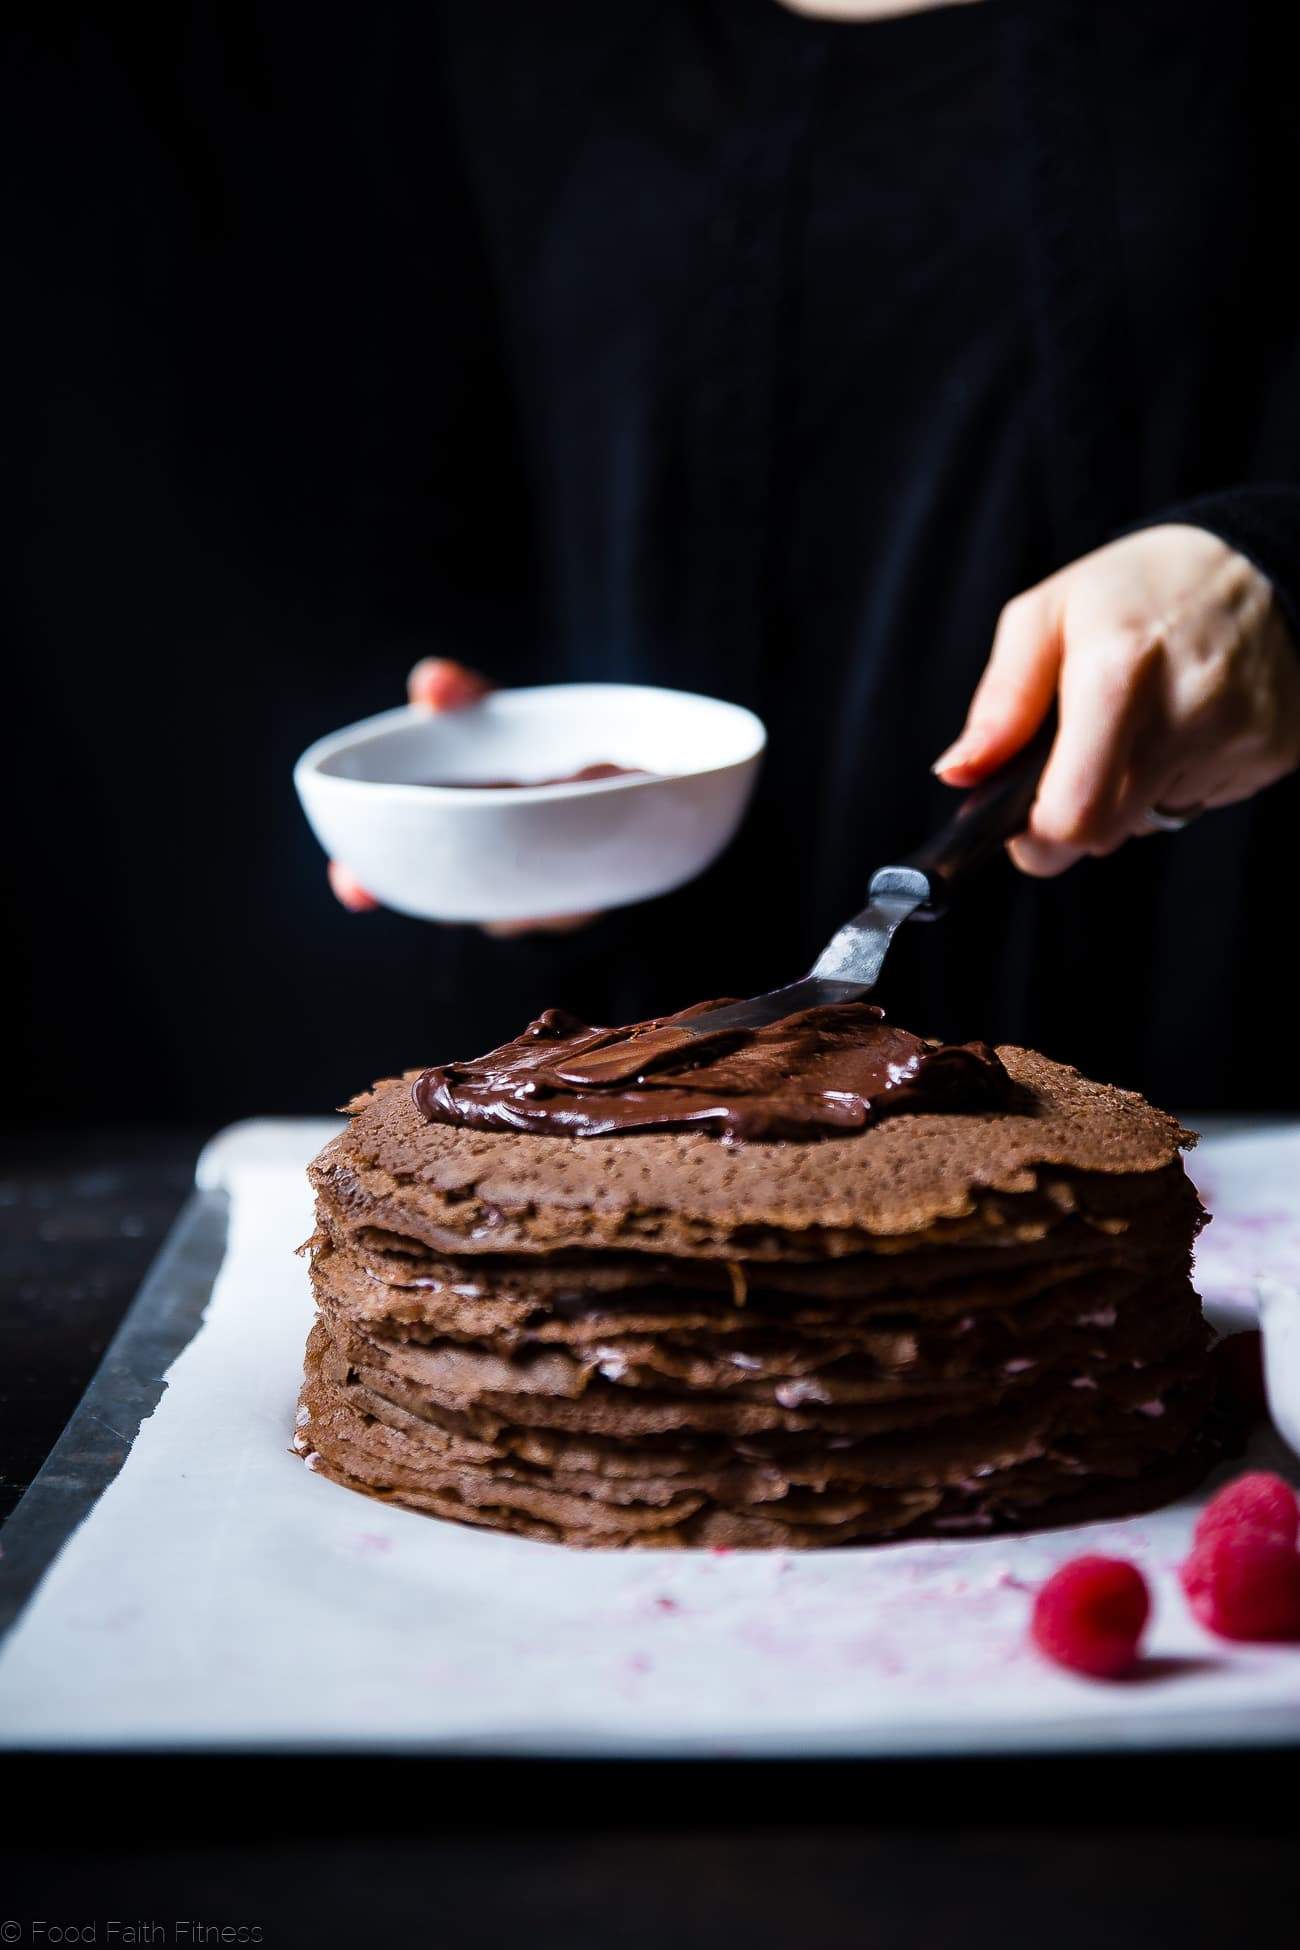 Raspberry Chocolate Vegan Crepe Cake - These crepe cake is made of chocolate crepes layered with raspberries and creamy coconut! It's an impressive healthier, gluten and dairy free dessert that everyone will love! | Foodfaithfitness.com | @FoodFaithFit